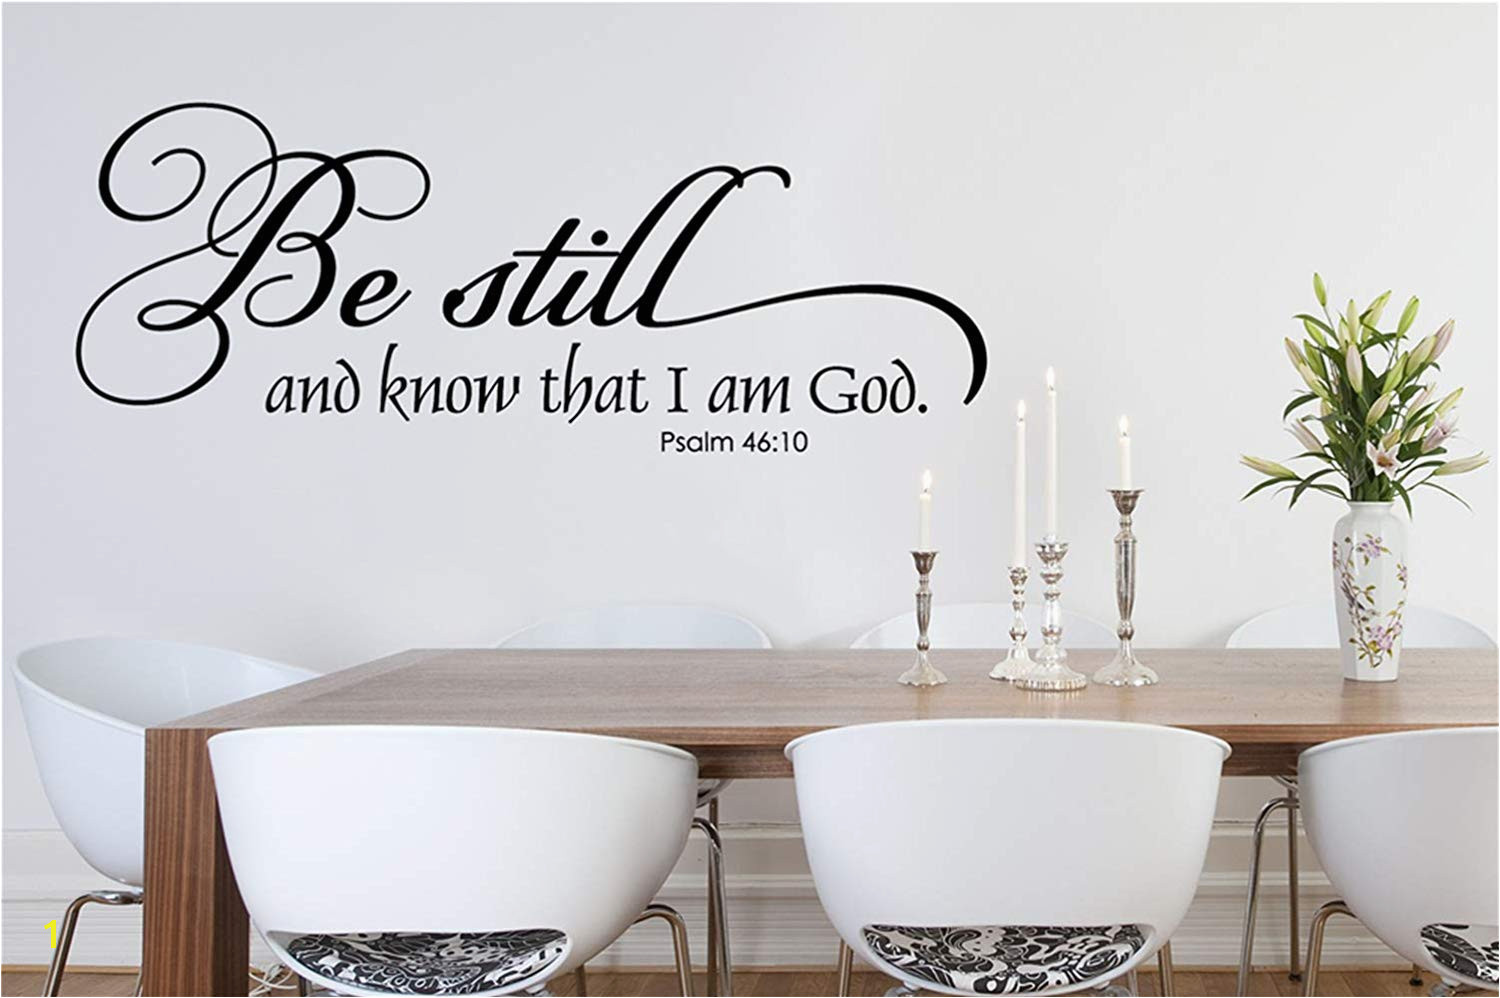 Amazon Vinyl Removable Wall Stickers Mural Decal Art Family Decals Be Still and Know Than I Am God Christian Wall Decal Home & Kitchen